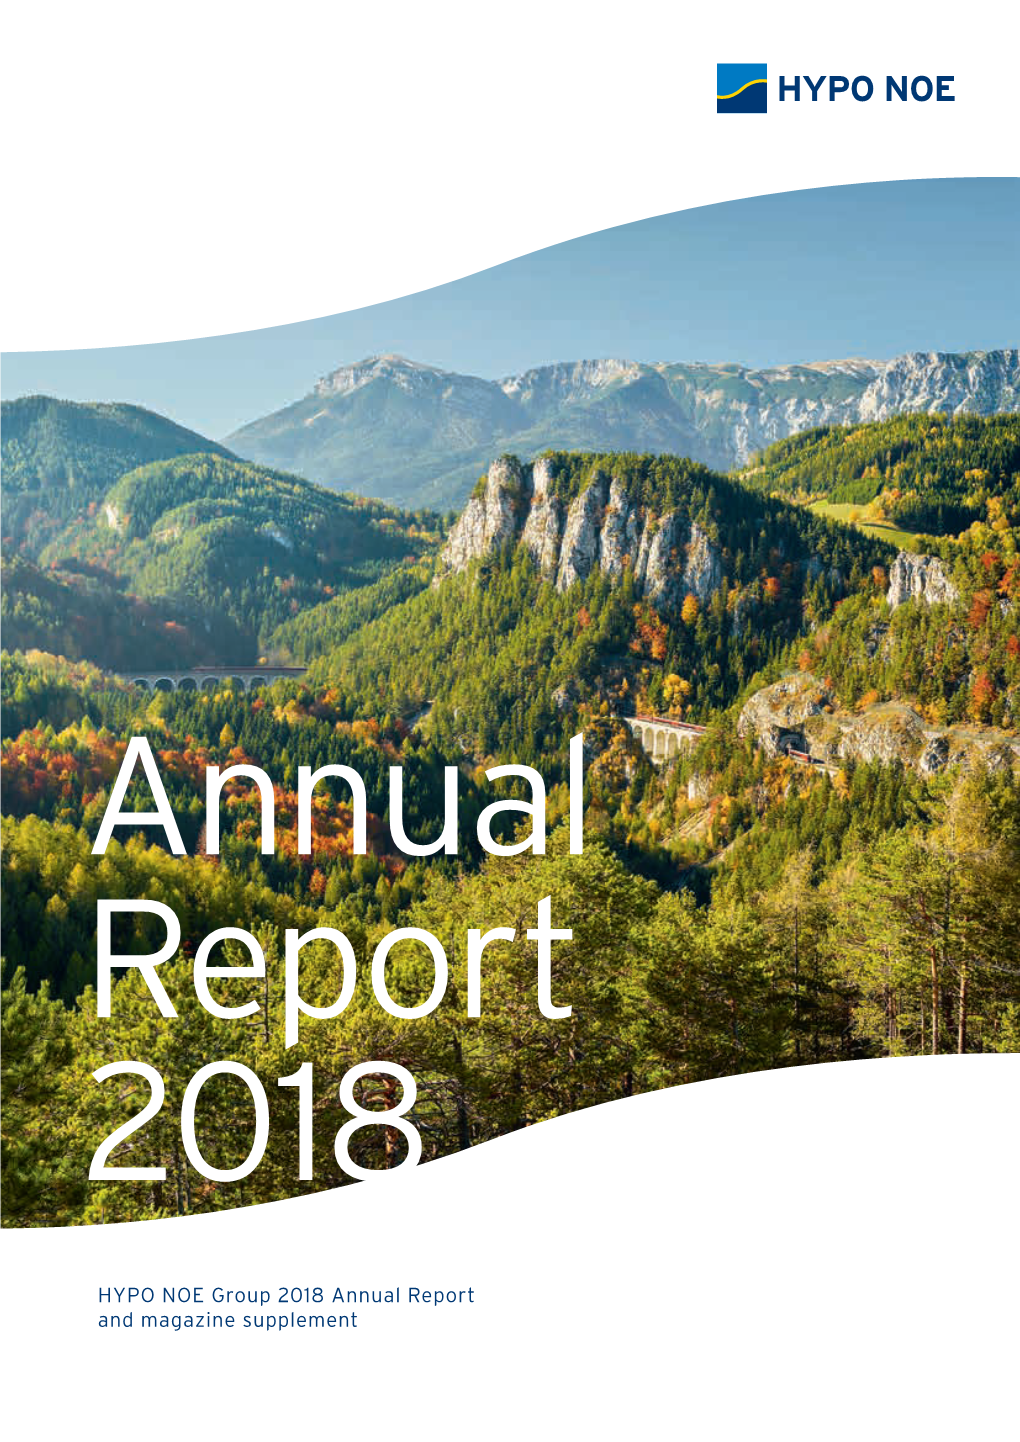 HYPO NOE Group 2018 Annual Report and Magazine Supplement Group Financial Highlights